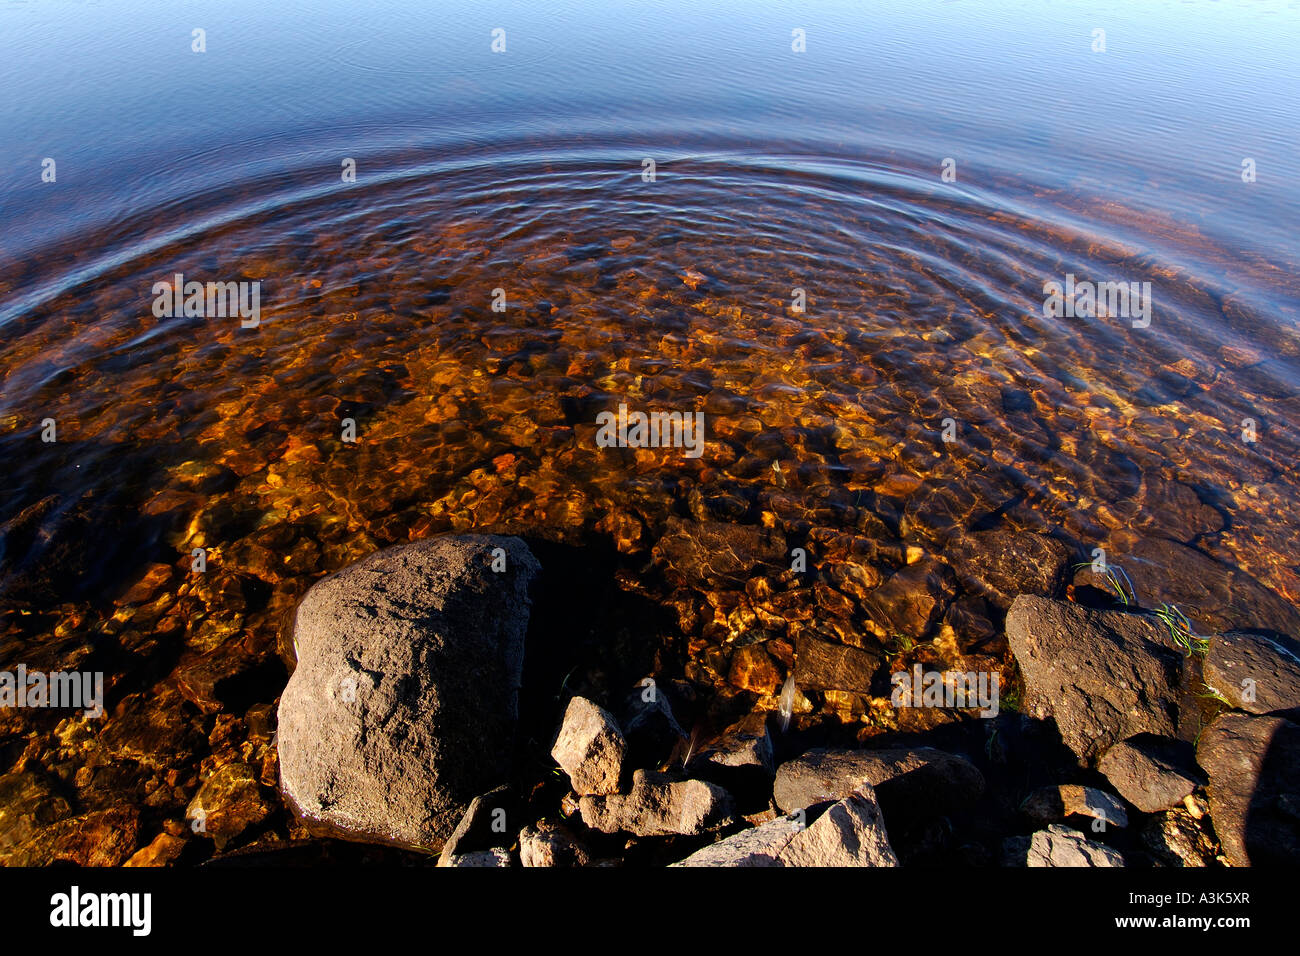 Abstract image of graduated colours on the surface of a reservoir with semi circular ripples Stock Photo